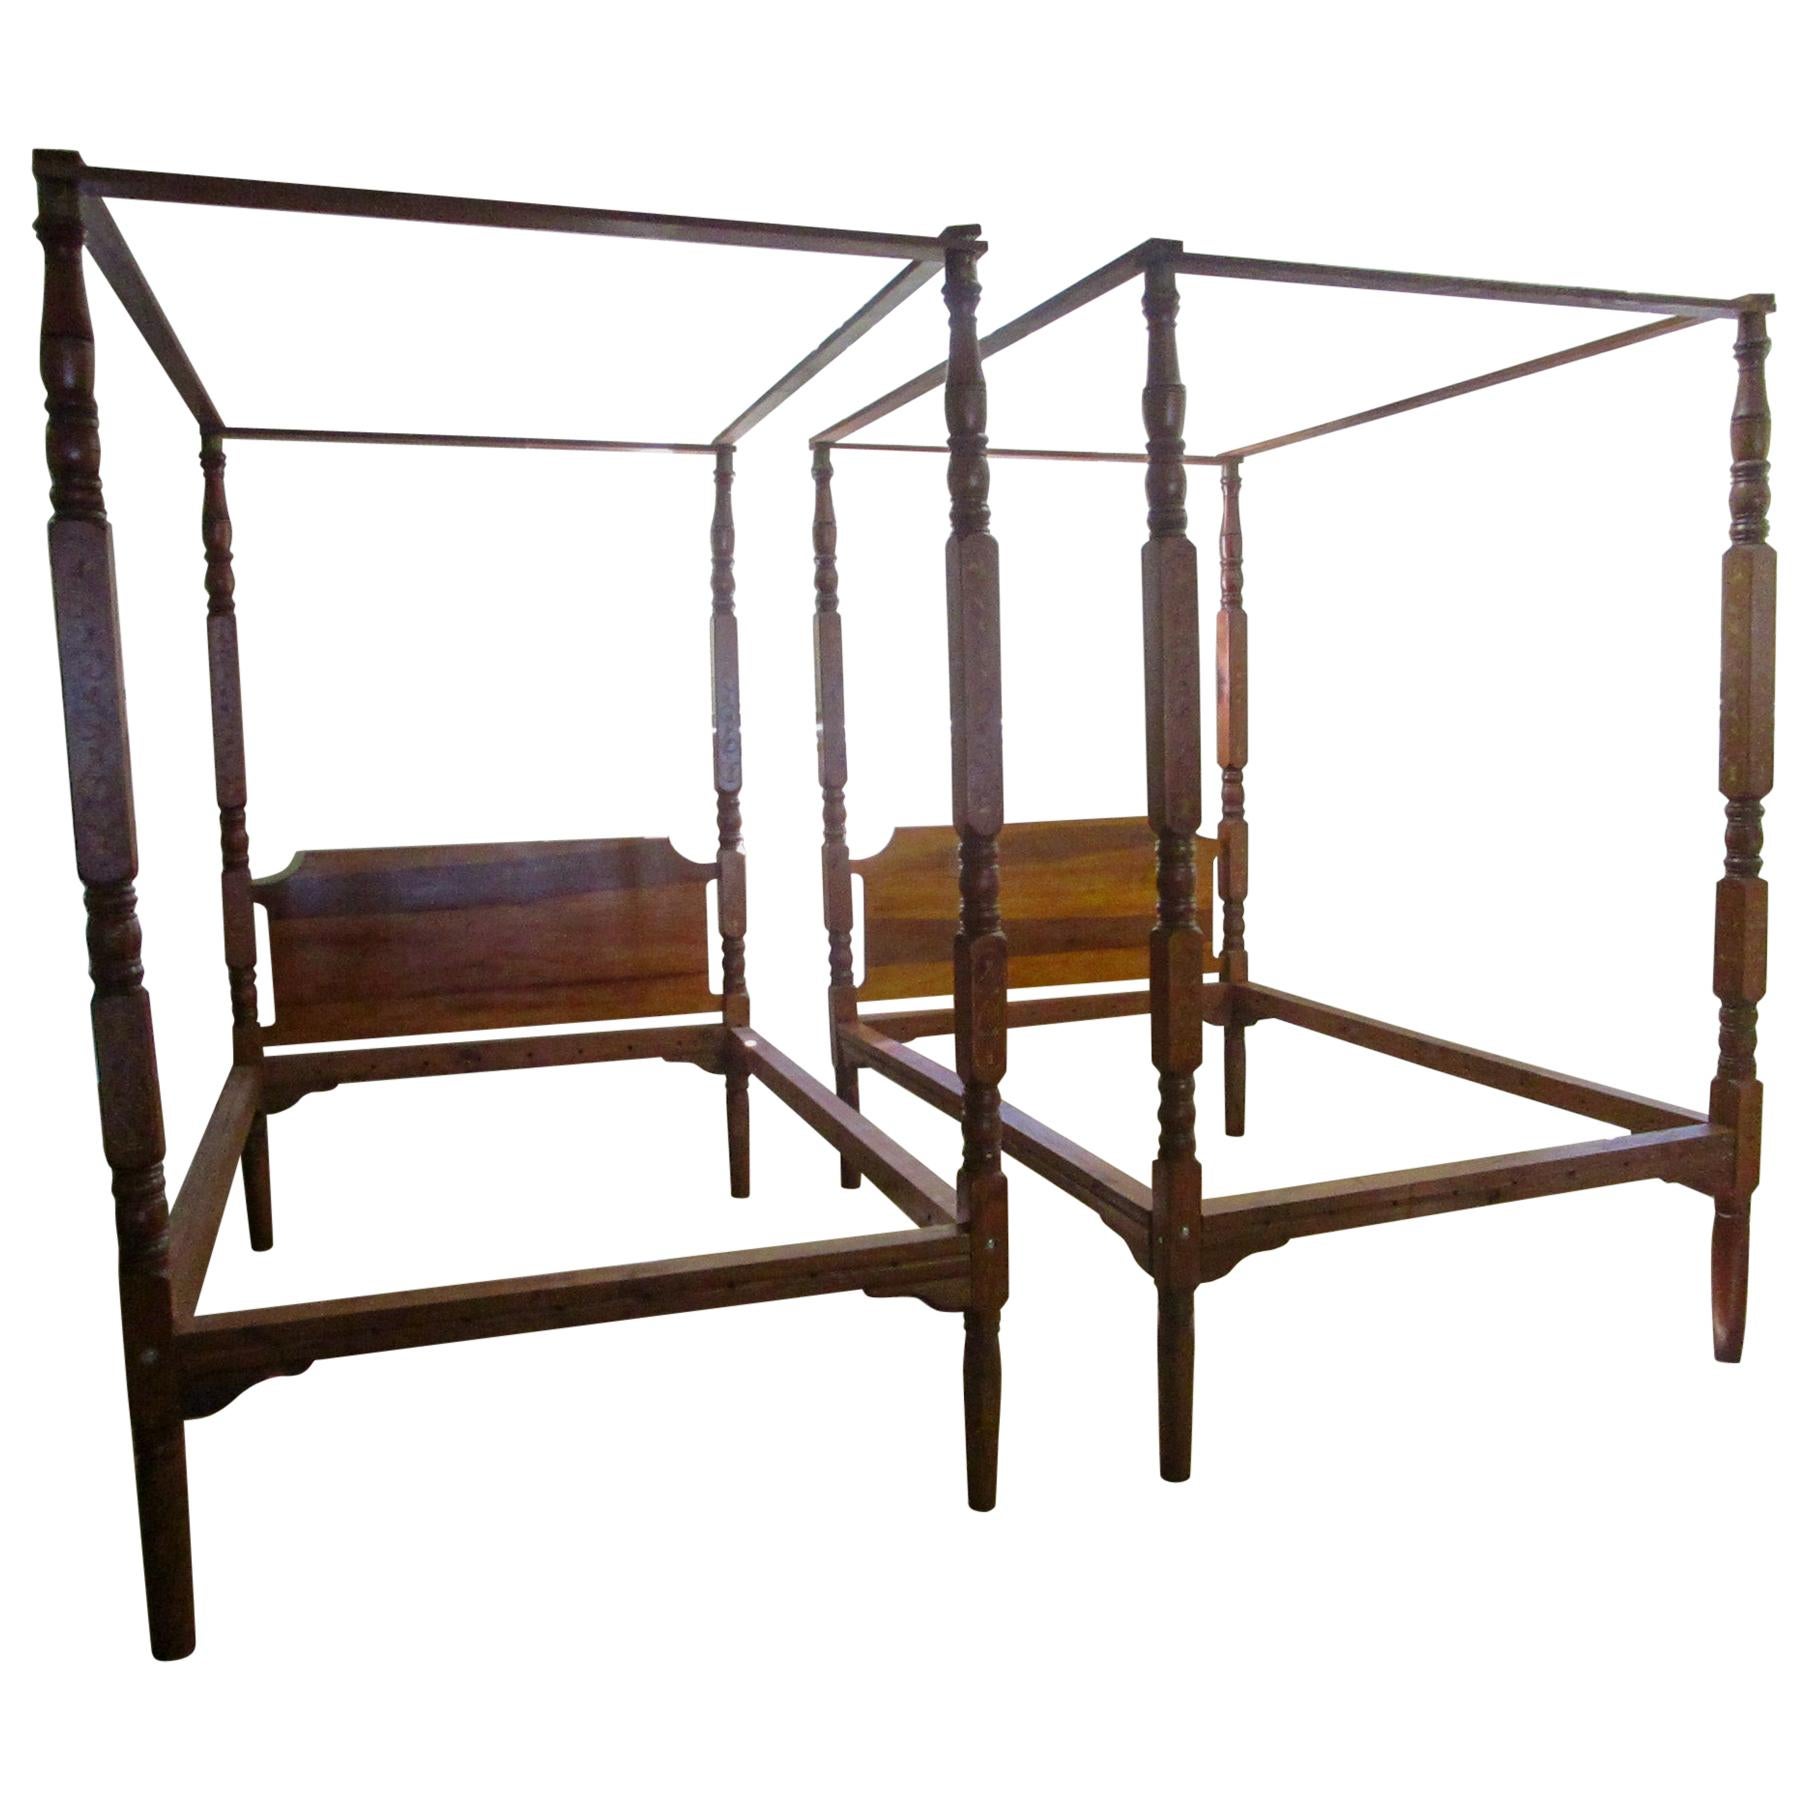 19th Century American Primitive Double Bed Pair with Canopies